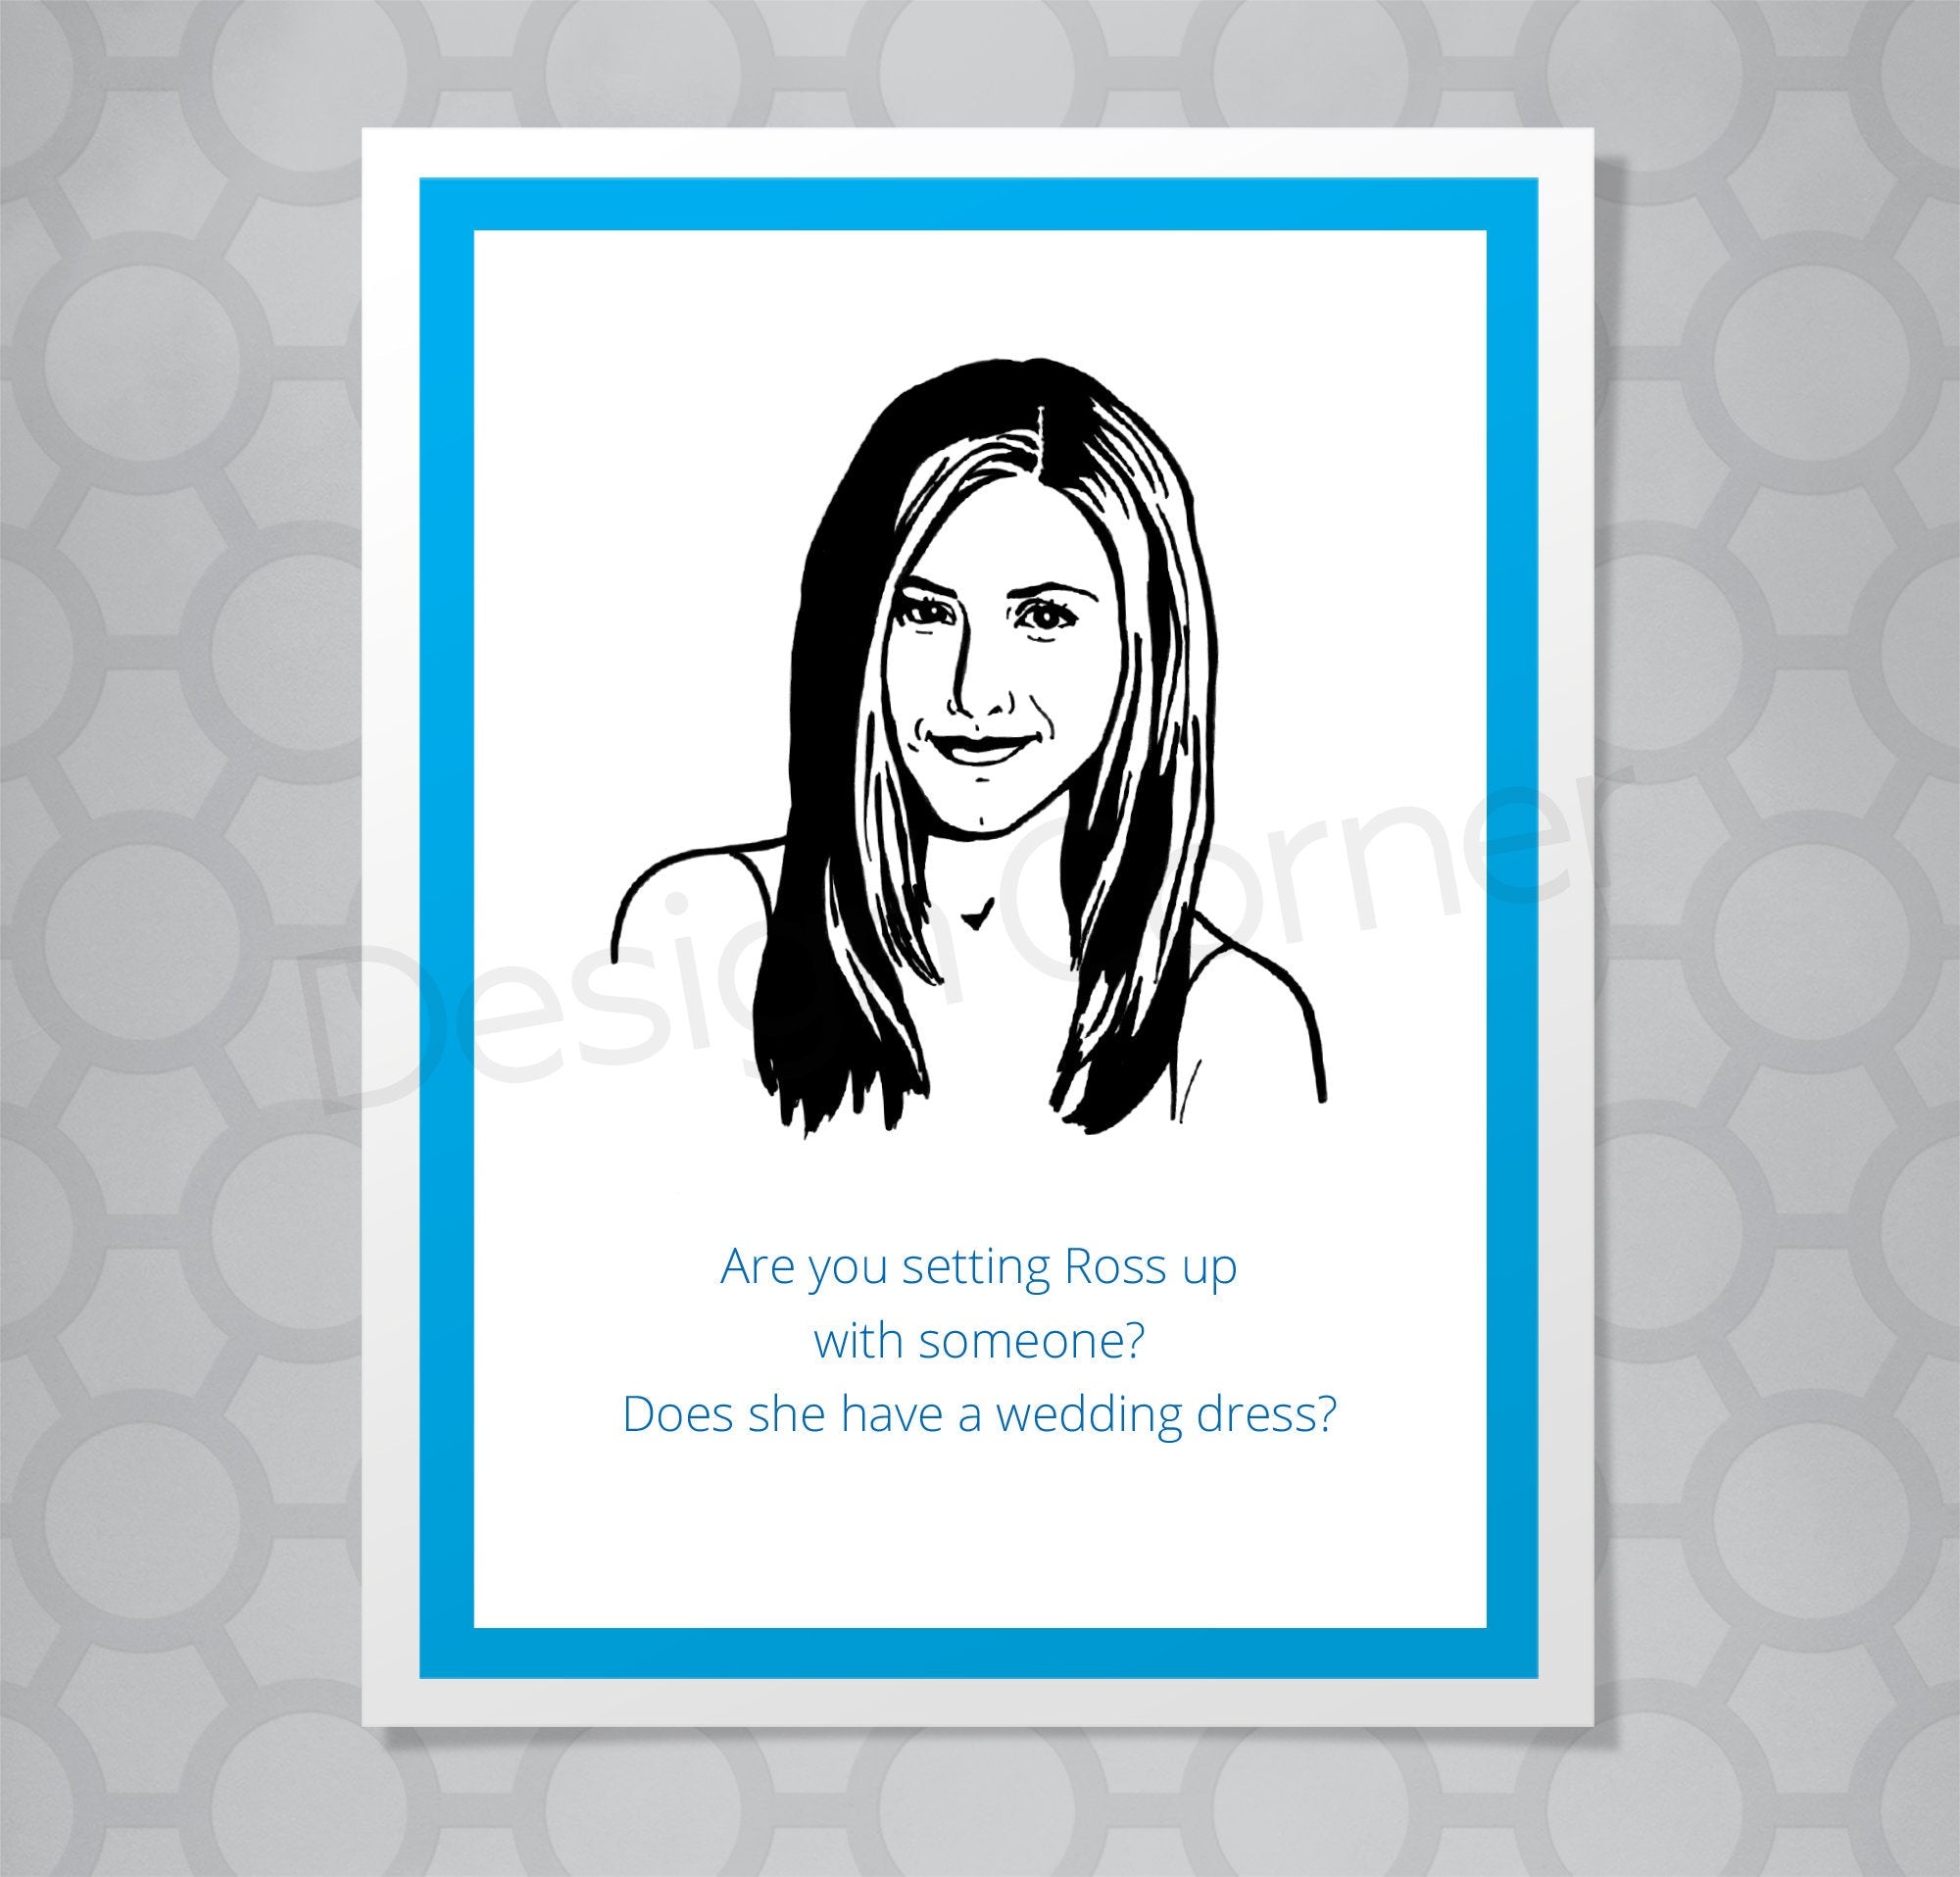 Greeting card with illustration of Friends Rachel. Caption says "Are you setting Ross up with someone? Does she have a wedding dress?"